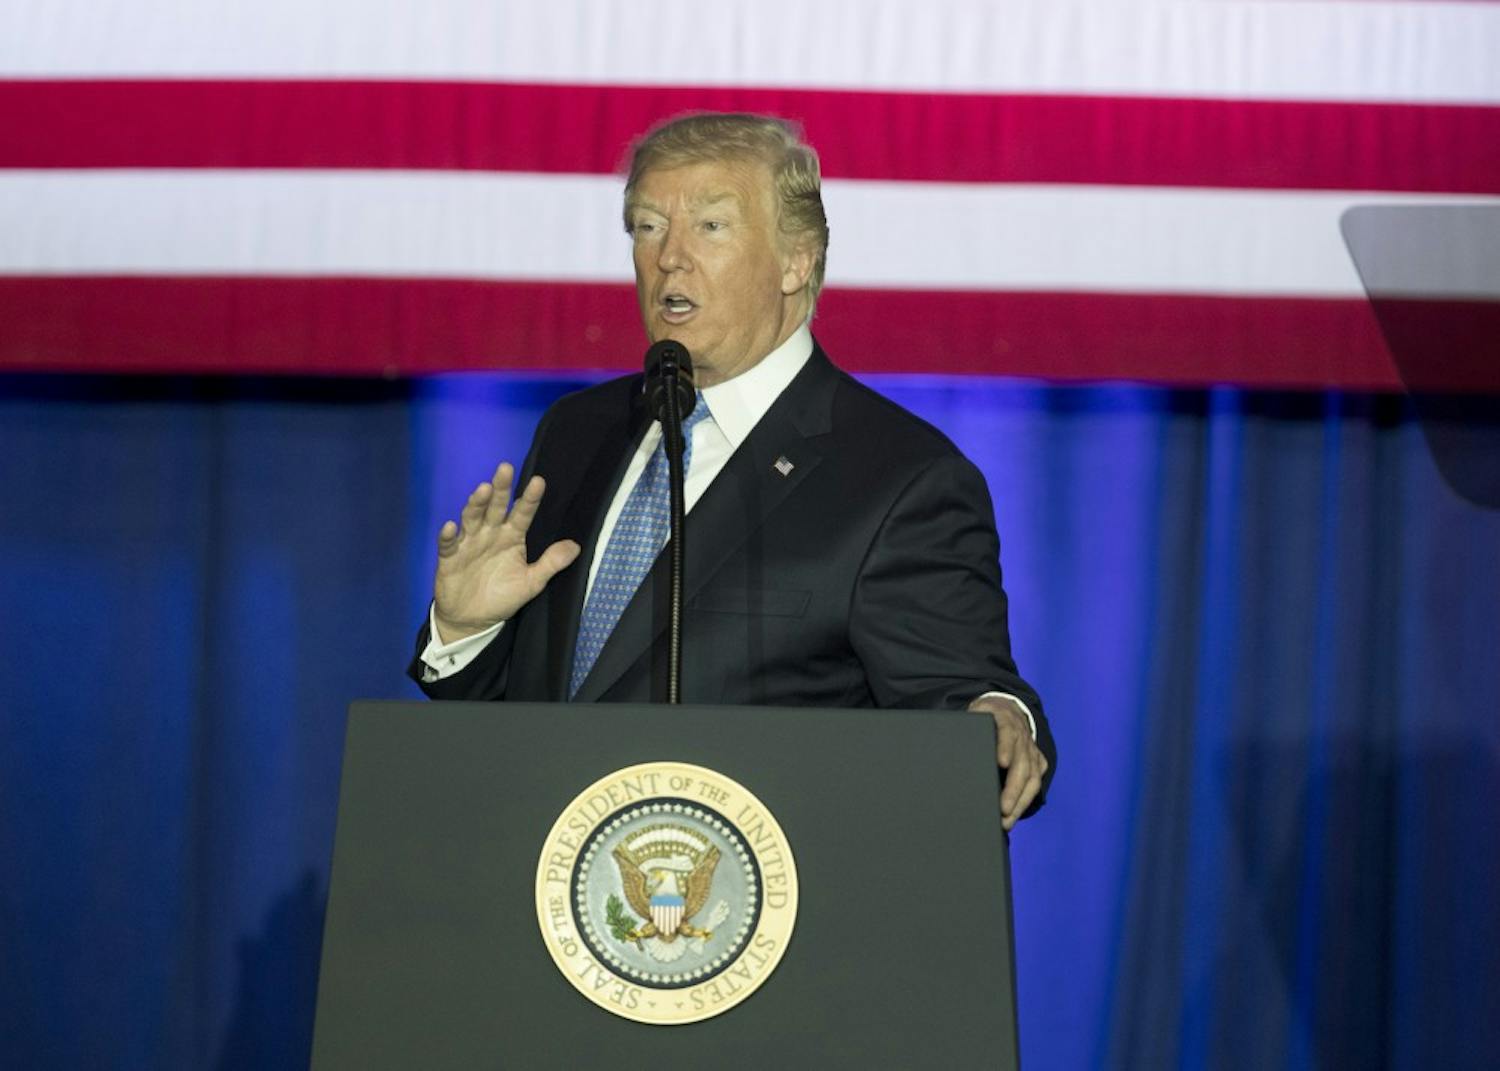 President Donald Trump speaks to a crowd at the Indiana State Fairgrounds Farm Bureau building on Sept. 27. The Trump administration on Sunday outlined immigration principles and policies it wants Congress to prioritize, including border security, interior enforcement and merit-based immigration series.